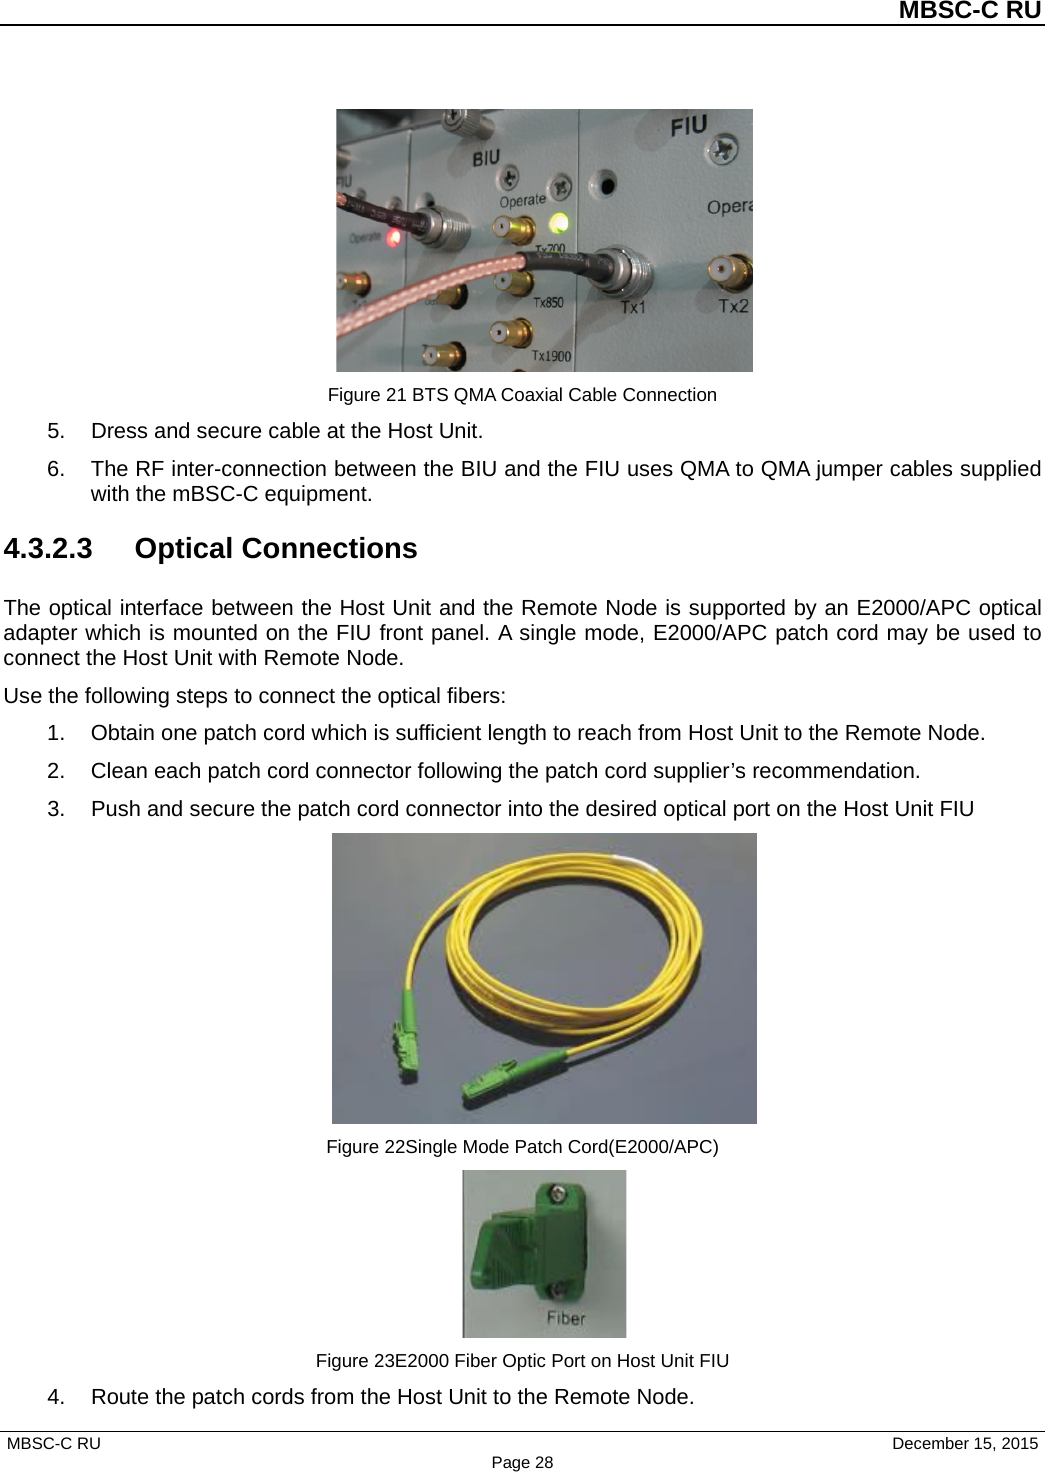          MBSC-C RU   MBSC-C RU                                     December 15, 2015 Page 28  Figure 21 BTS QMA Coaxial Cable Connection 5. Dress and secure cable at the Host Unit. 6. The RF inter-connection between the BIU and the FIU uses QMA to QMA jumper cables supplied with the mBSC-C equipment. 4.3.2.3  Optical Connections The optical interface between the Host Unit and the Remote Node is supported by an E2000/APC optical adapter which is mounted on the FIU front panel. A single mode, E2000/APC patch cord may be used to connect the Host Unit with Remote Node. Use the following steps to connect the optical fibers: 1. Obtain one patch cord which is sufficient length to reach from Host Unit to the Remote Node. 2. Clean each patch cord connector following the patch cord supplier’s recommendation. 3. Push and secure the patch cord connector into the desired optical port on the Host Unit FIU  Figure 22Single Mode Patch Cord(E2000/APC)  Figure 23E2000 Fiber Optic Port on Host Unit FIU 4. Route the patch cords from the Host Unit to the Remote Node. 